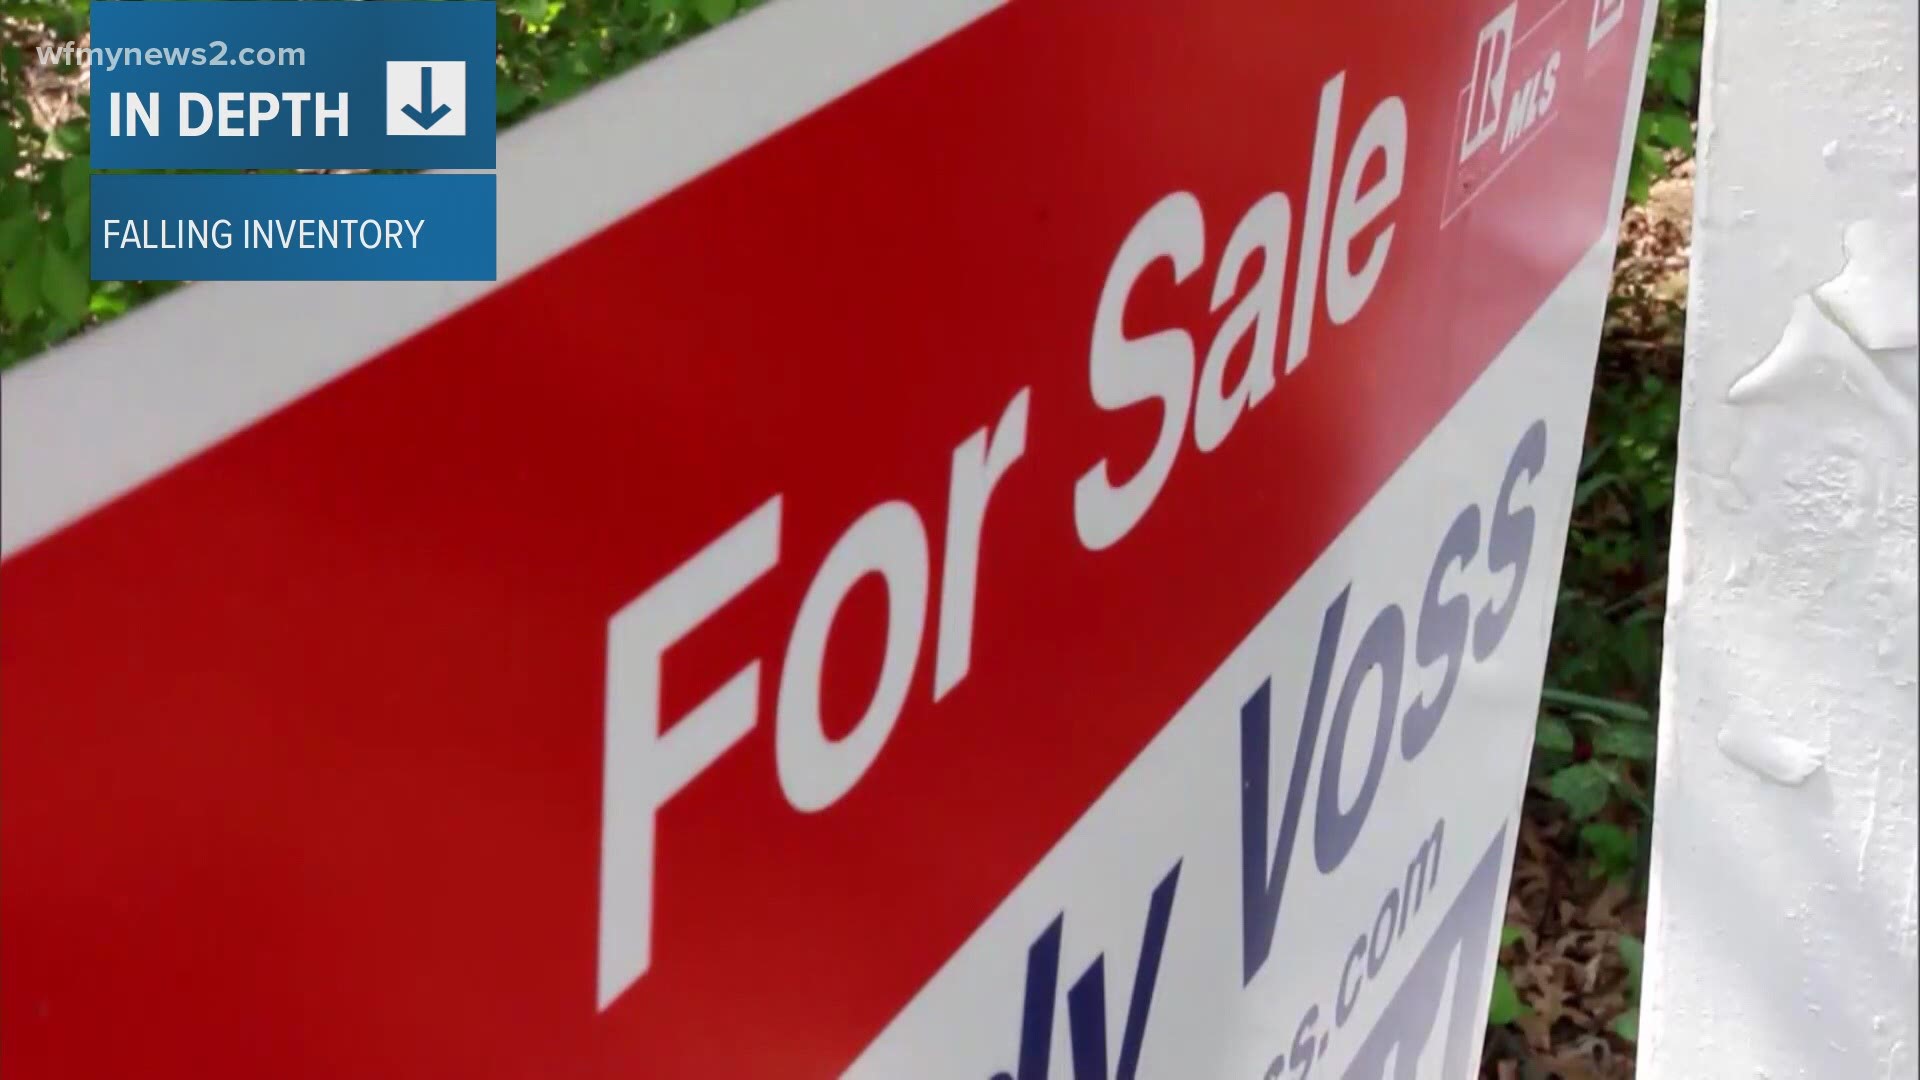 The Triad housing market is flooded with buyers, but not enough homes on the market. Sellers are getting dozens of offers in a matter of days.